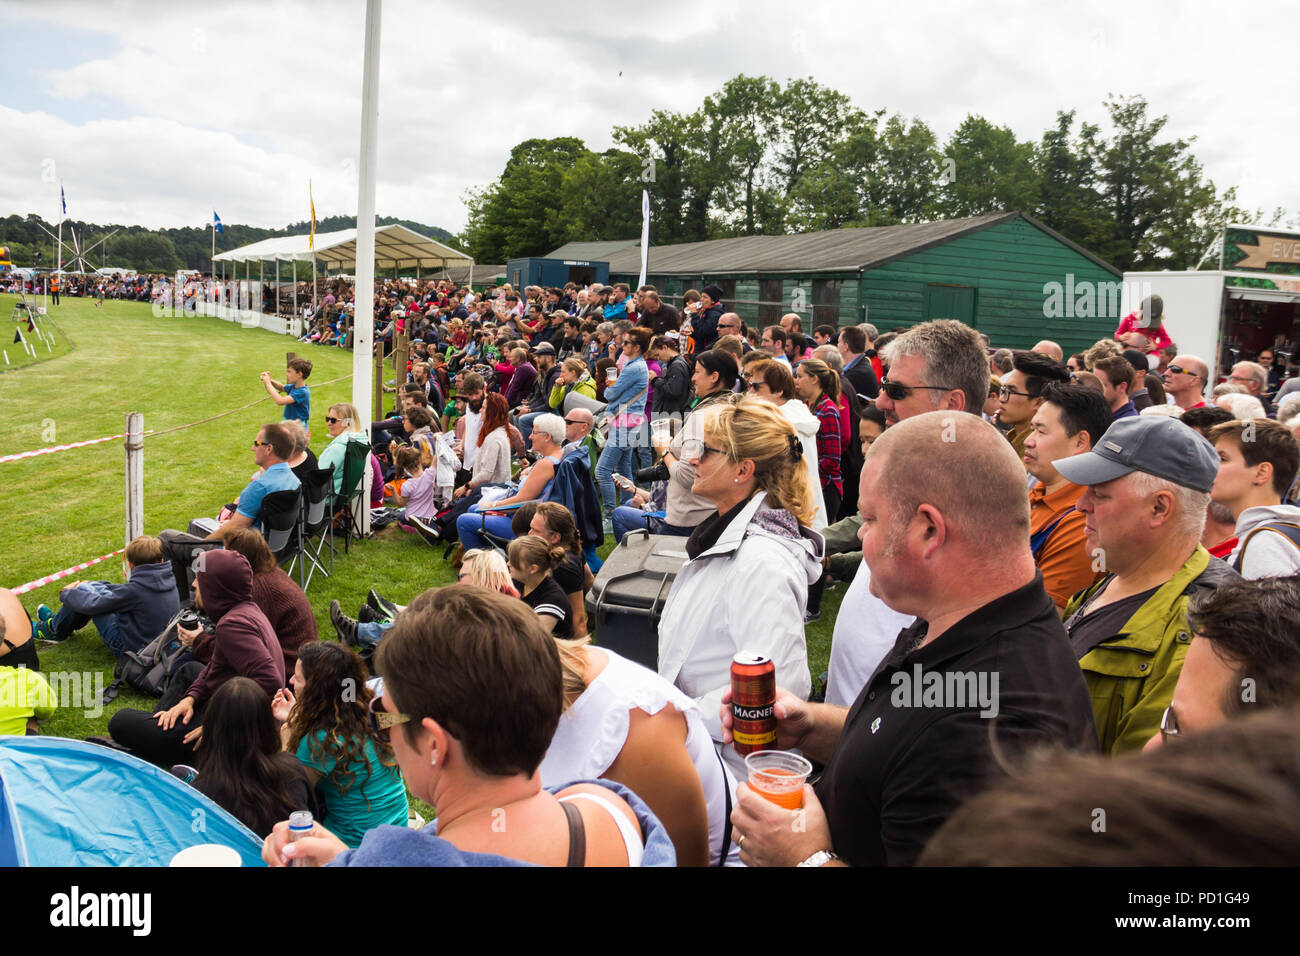 Stirling, Scotland, UK. 5th August 2018. Spectators around the main show ring at Strathallan Games Park near Stirling, the venue for the 167th Bridge of Allan Highland Games.  Crowds have gathered to watch highland dancing, the pipe band competion, athletics, cycle racing and the traditional heavywight contests including tossing the caber.  Credit Joseph Clemson, JY News Images/Alamy Live News. Stock Photo